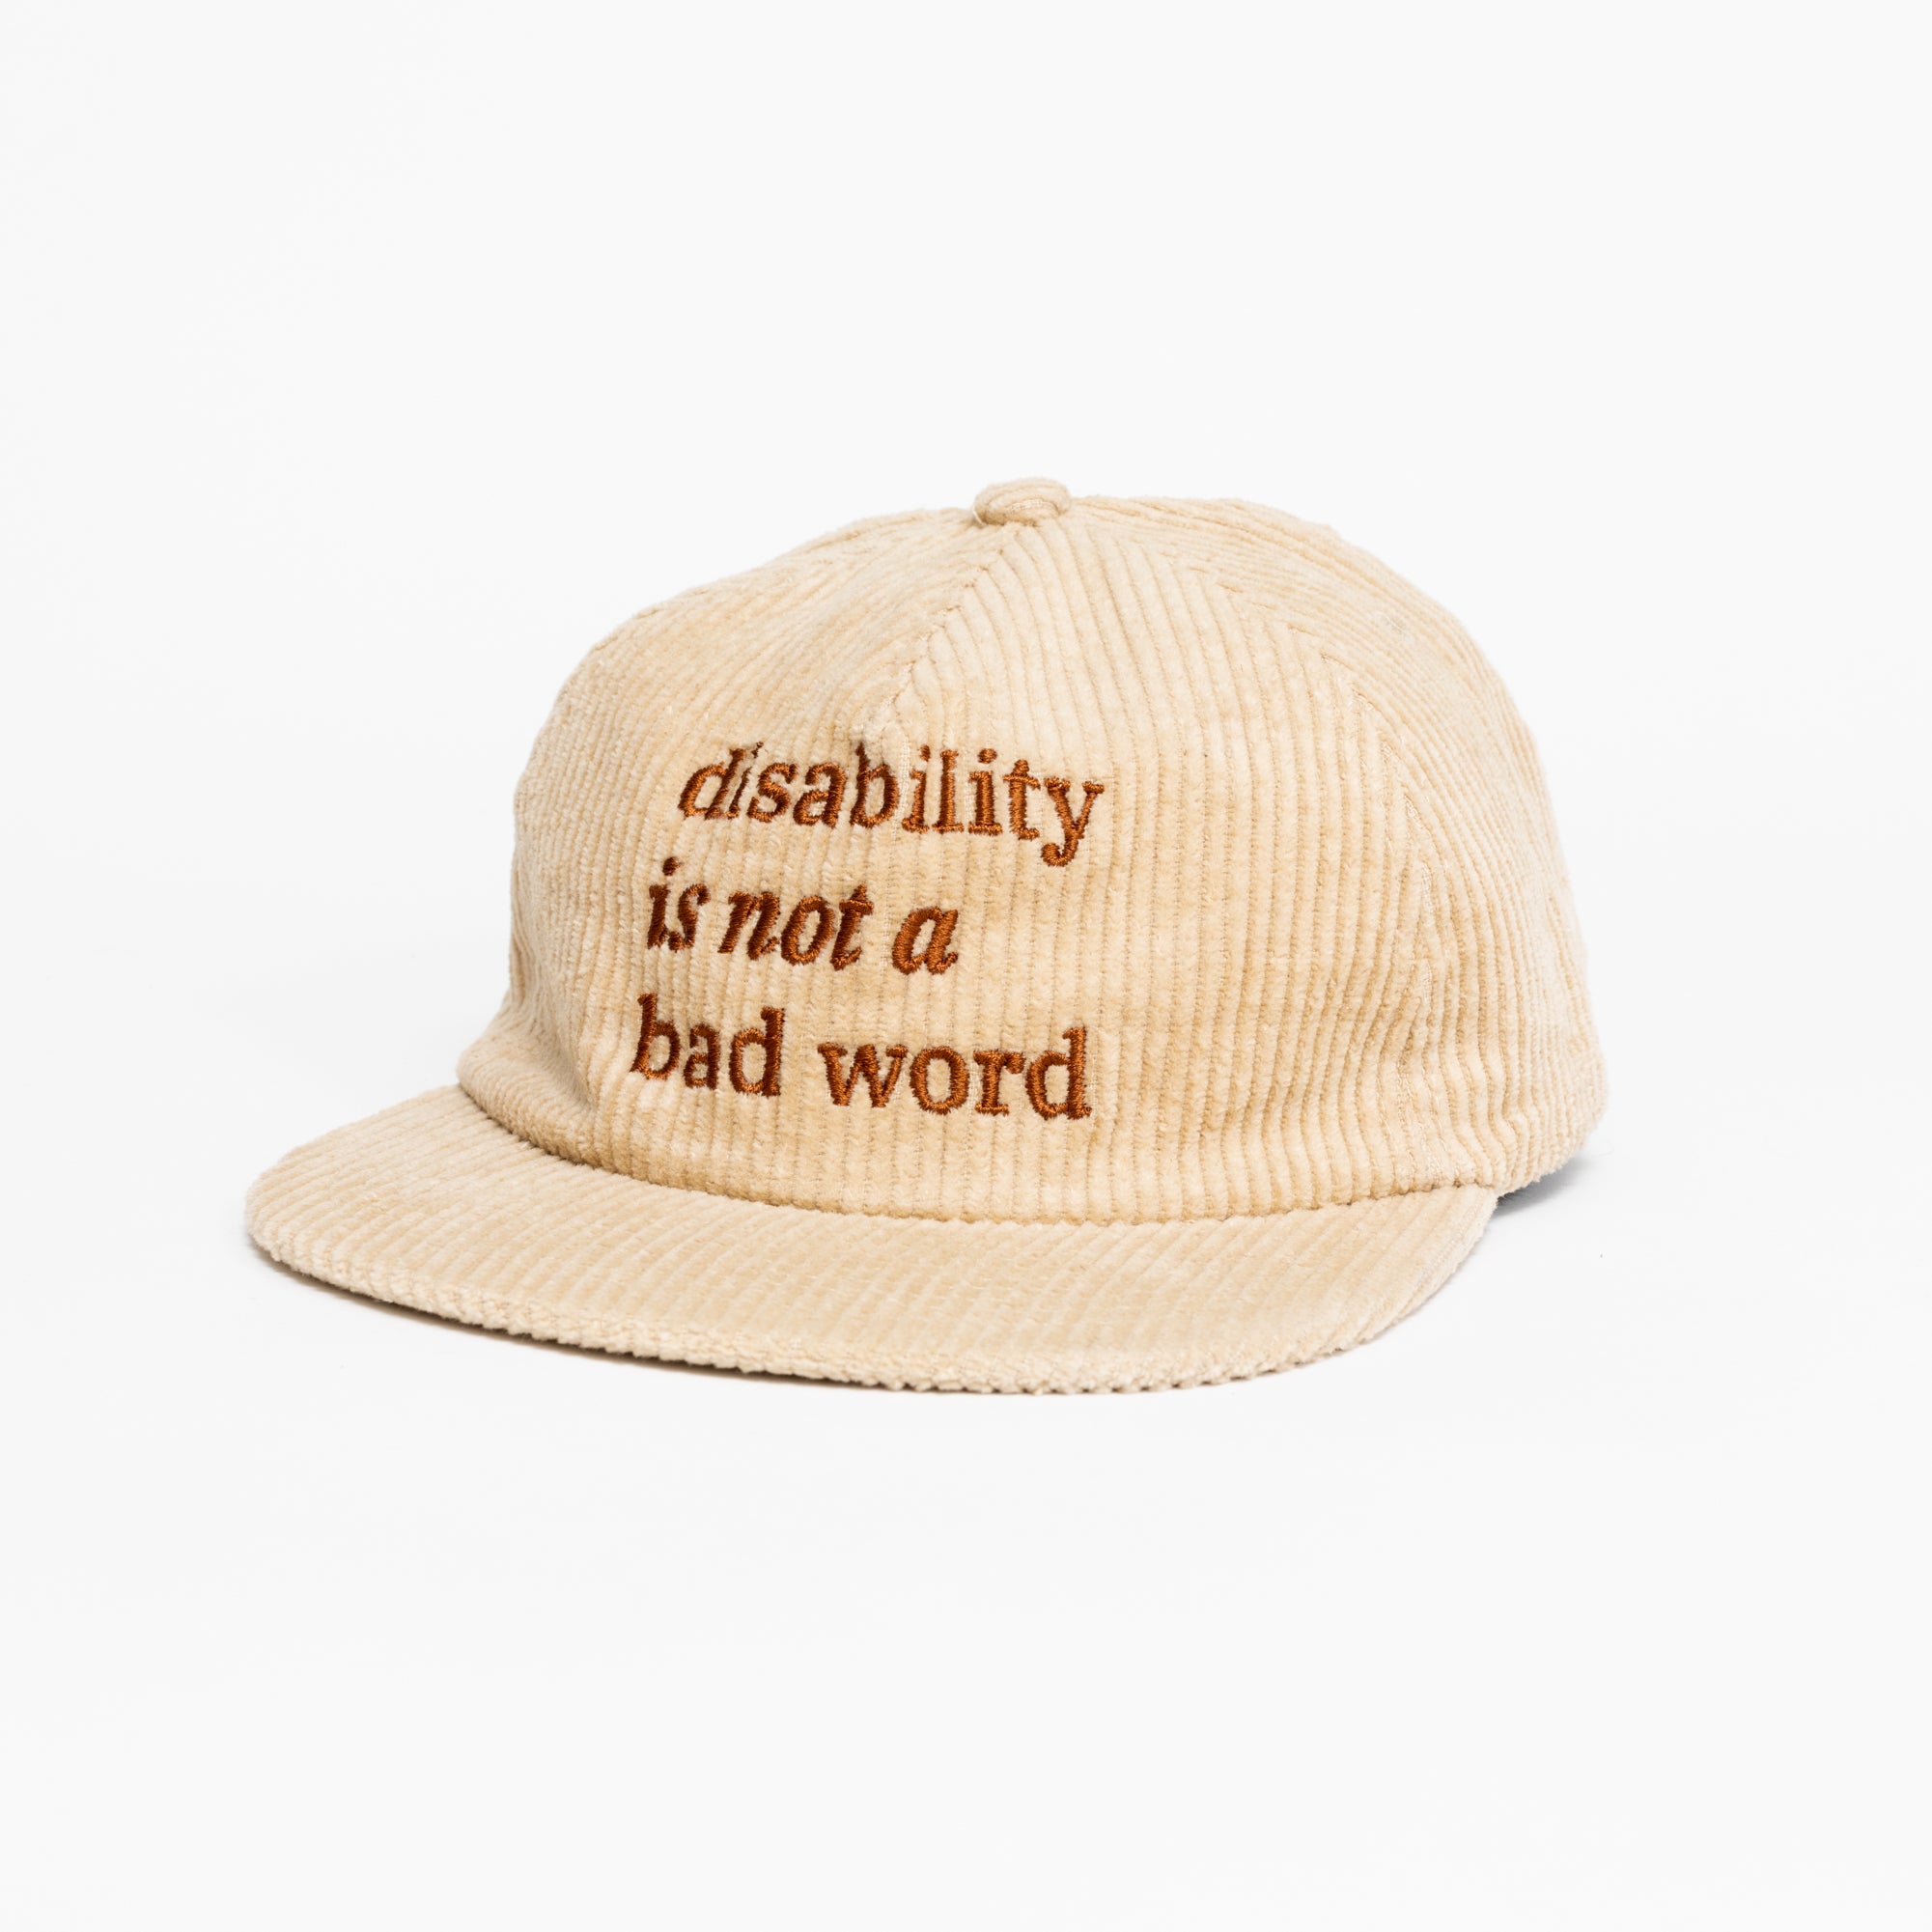 A cream baseball cap with brown text that says "disability is not a bad word."